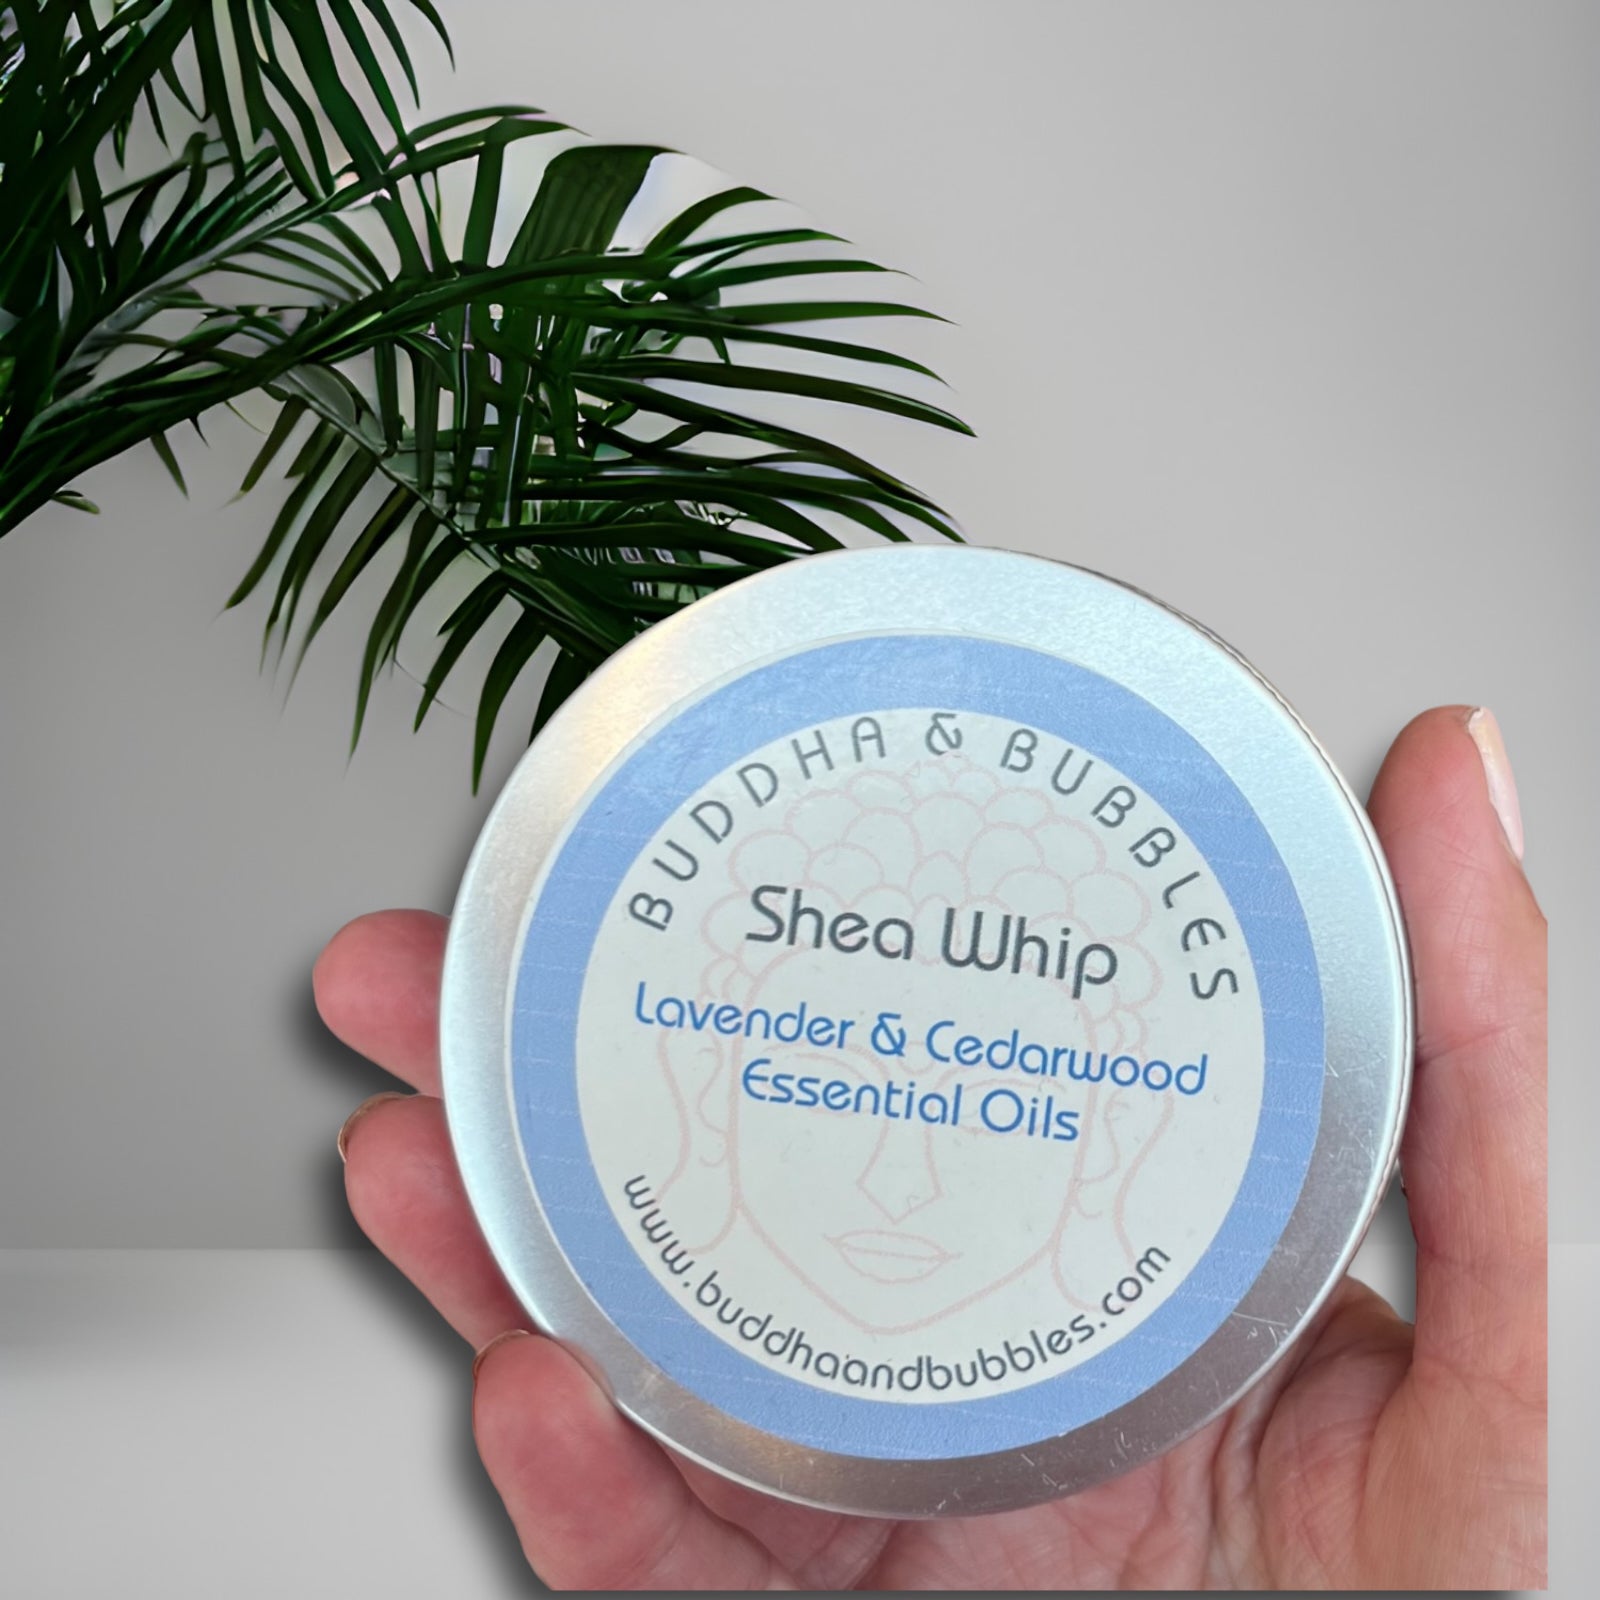 handmade shea whip with Lavender and Cedarwood essential oils